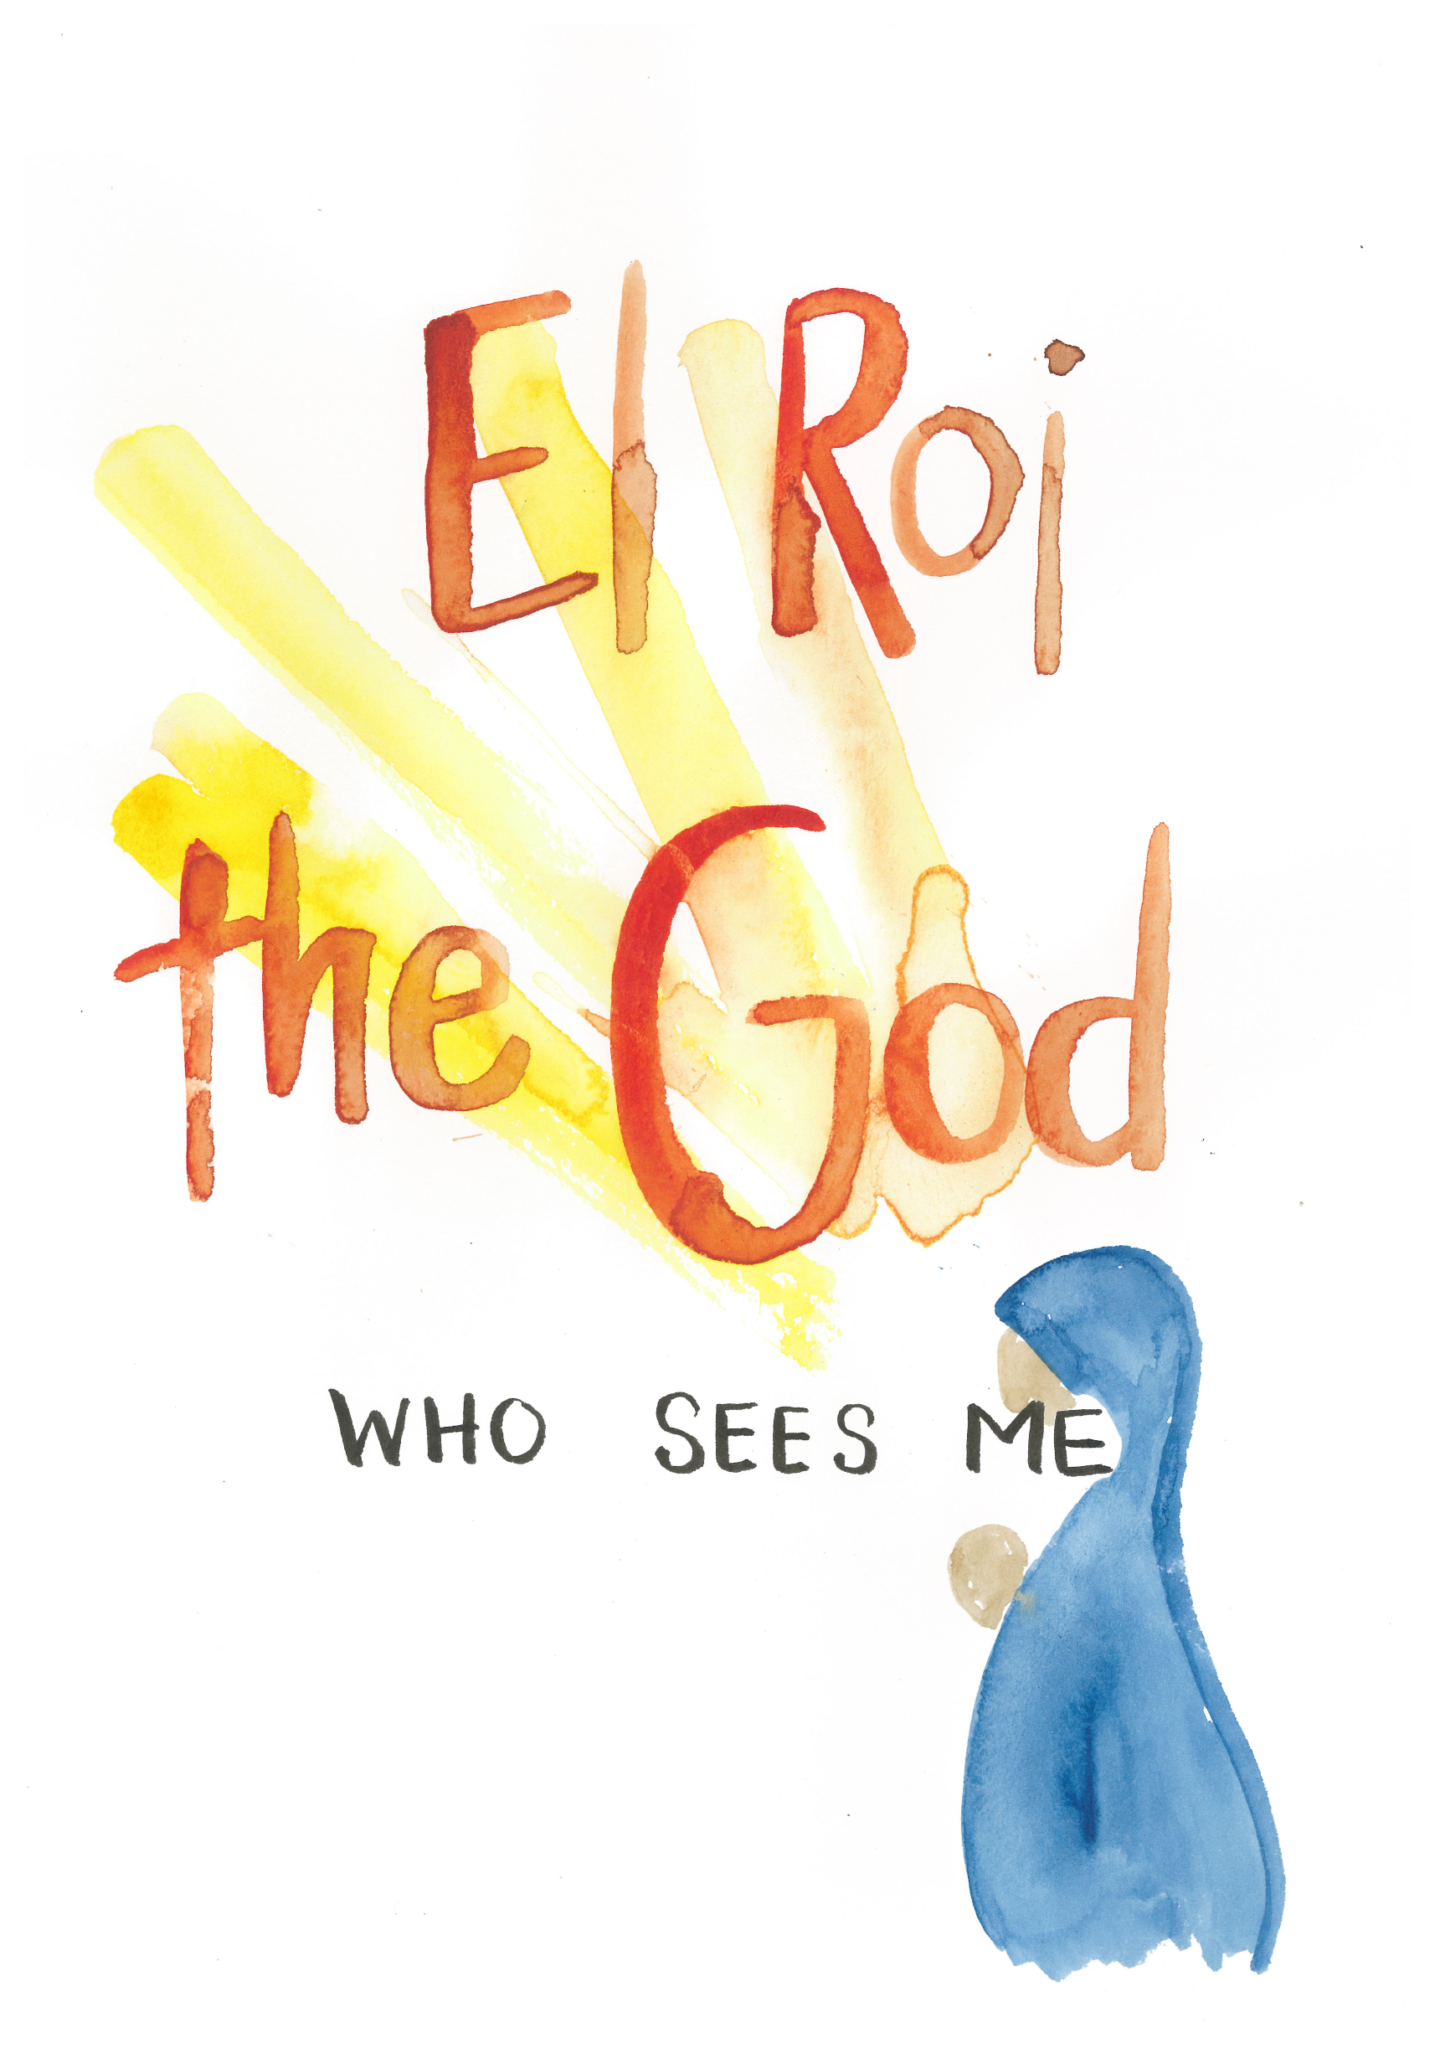 Hagar praying and the words "El Roi, the God who sees me"